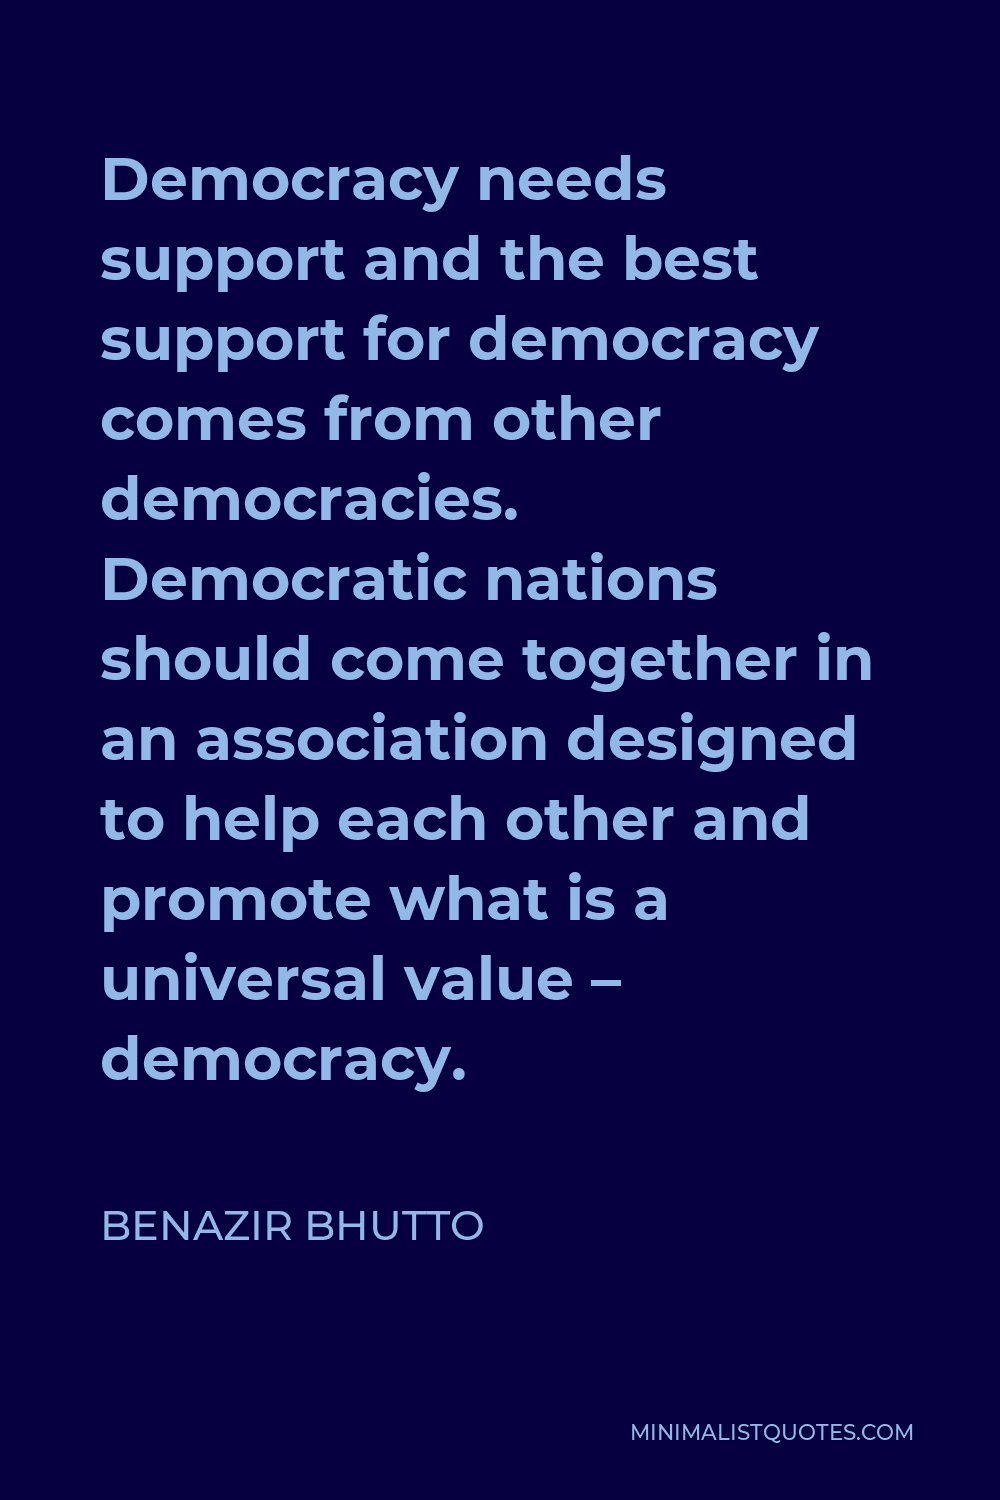 Benazir Bhutto Quote - Democracy needs support, and the best support for democracy comes from other democracies.